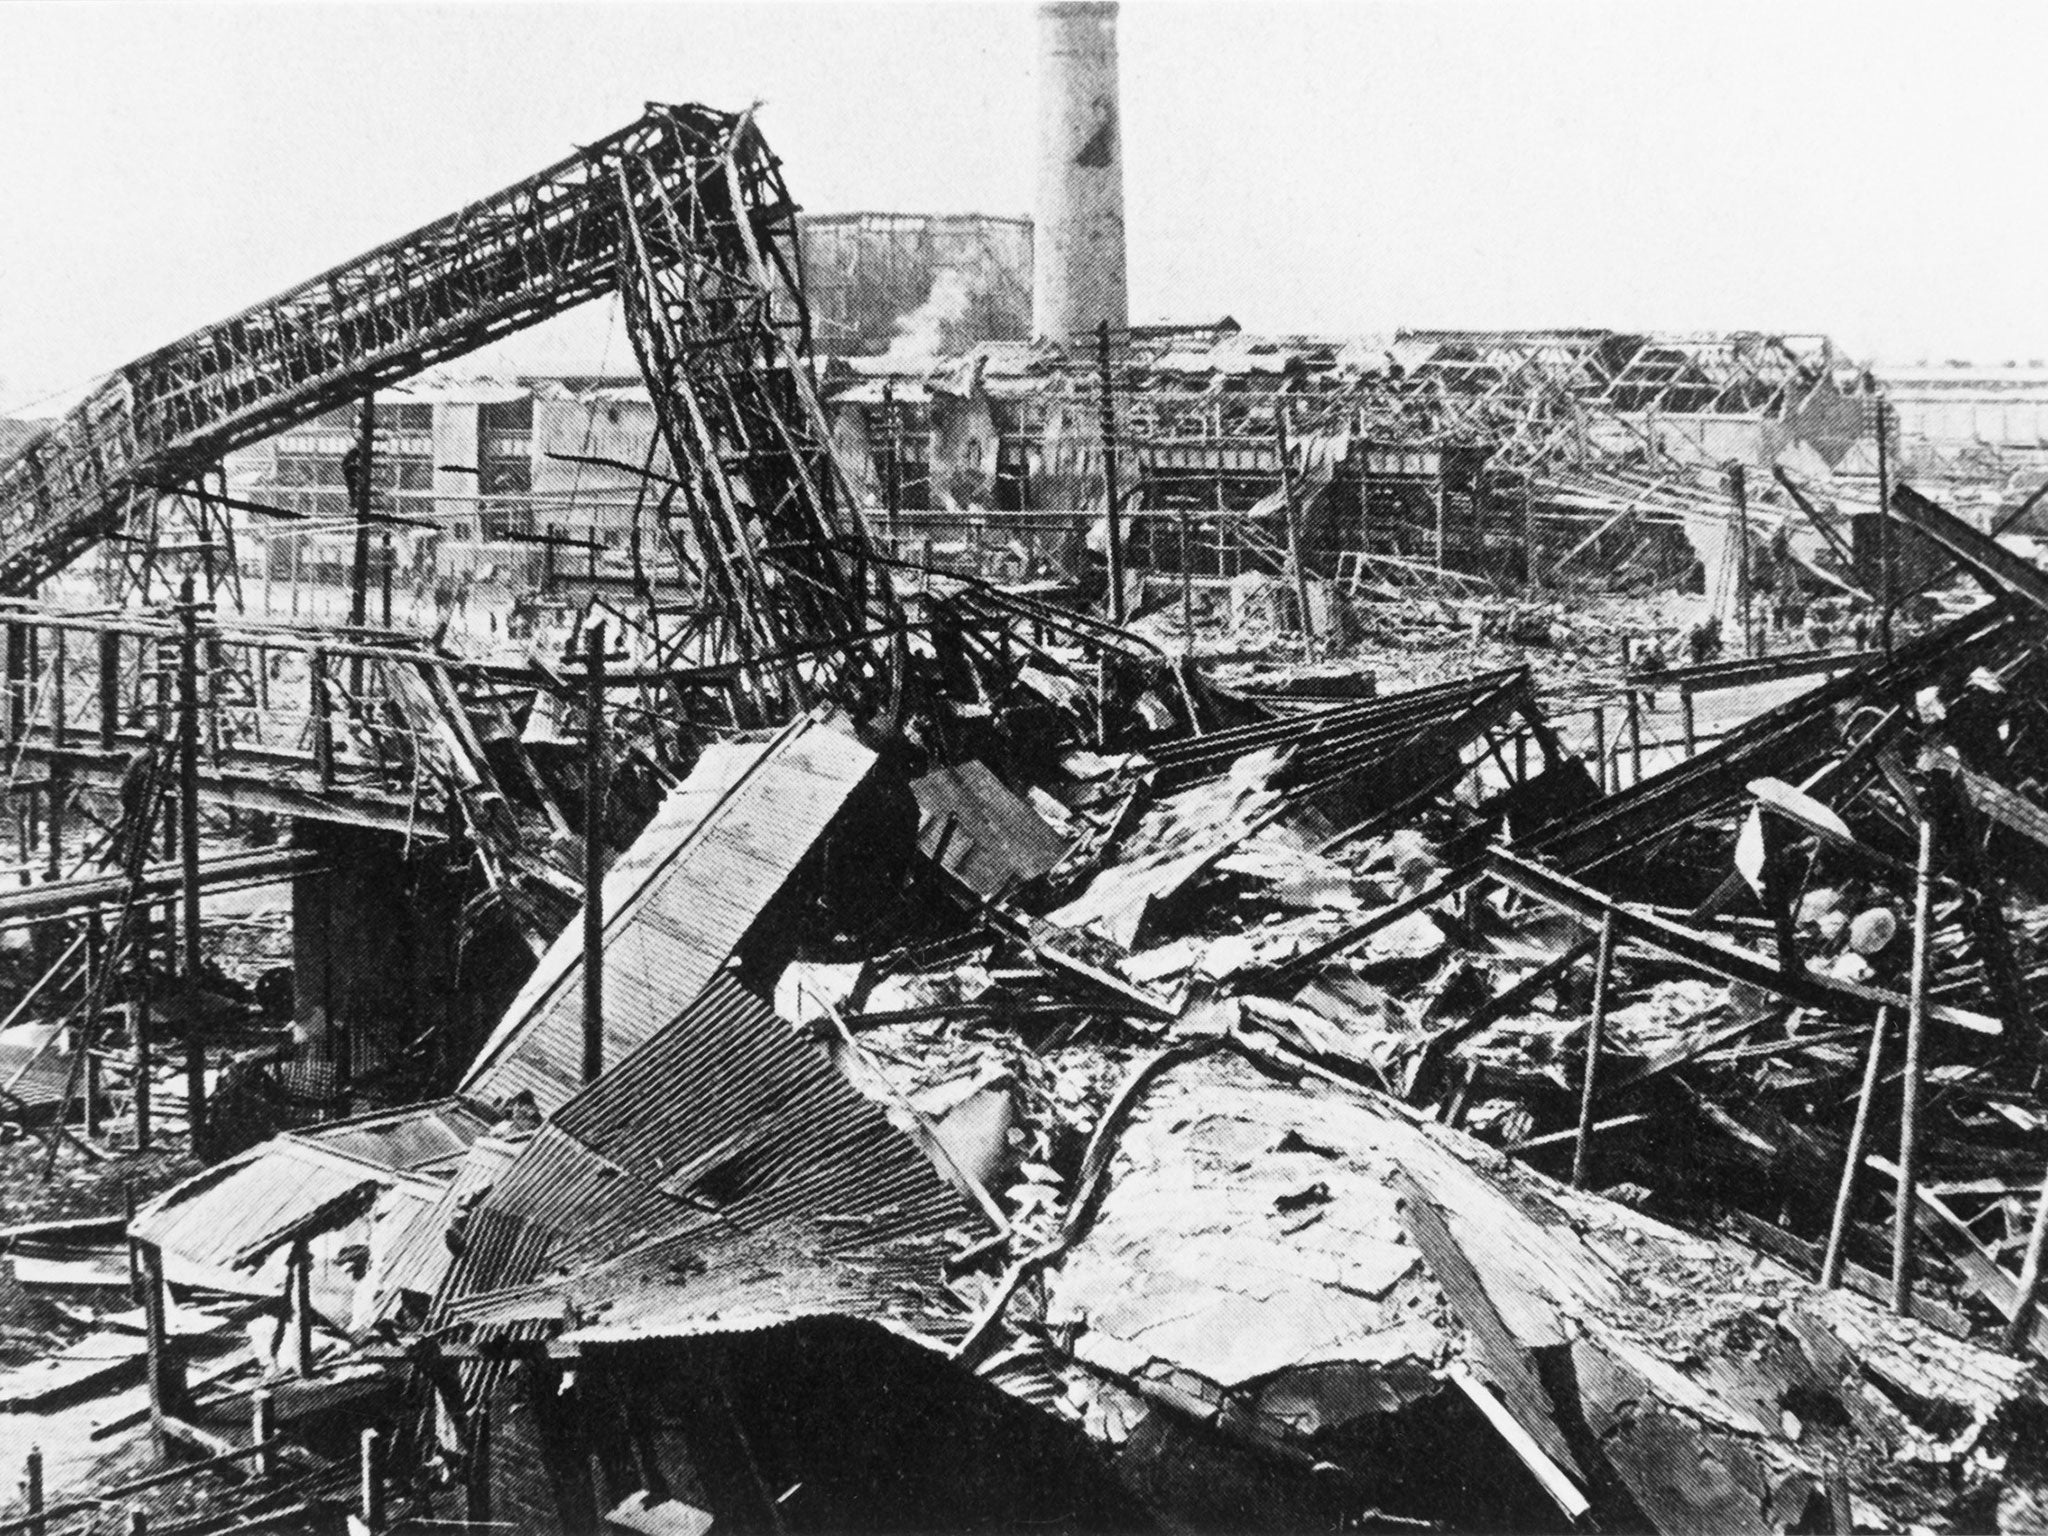 The aftermath of the explosion at the munitions plant in Chilwell